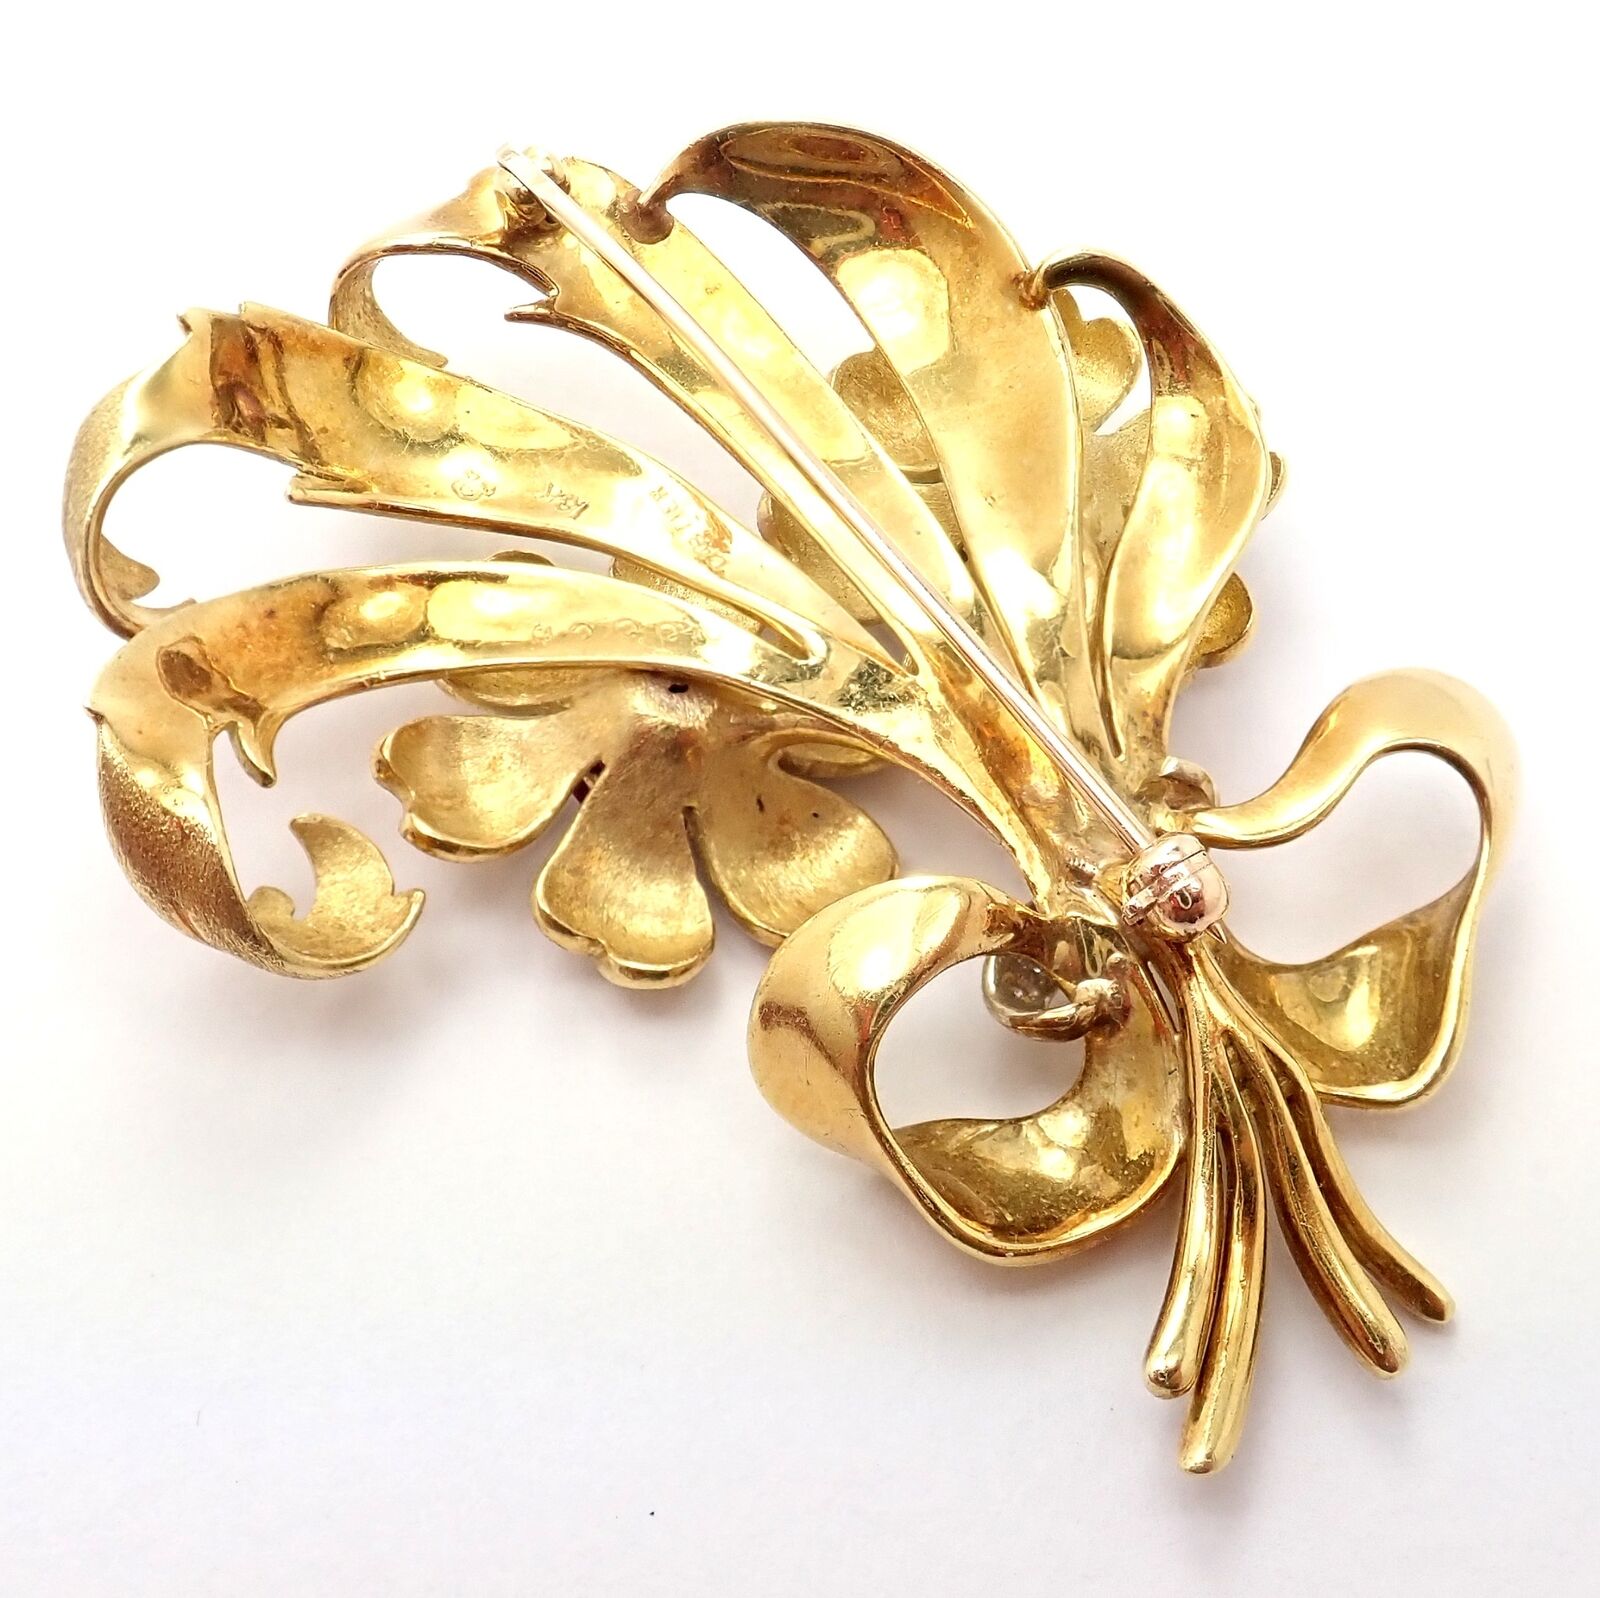 Vintage Coro Gold Tone Leaf Brooch Pin a Classic and Elegant Mid